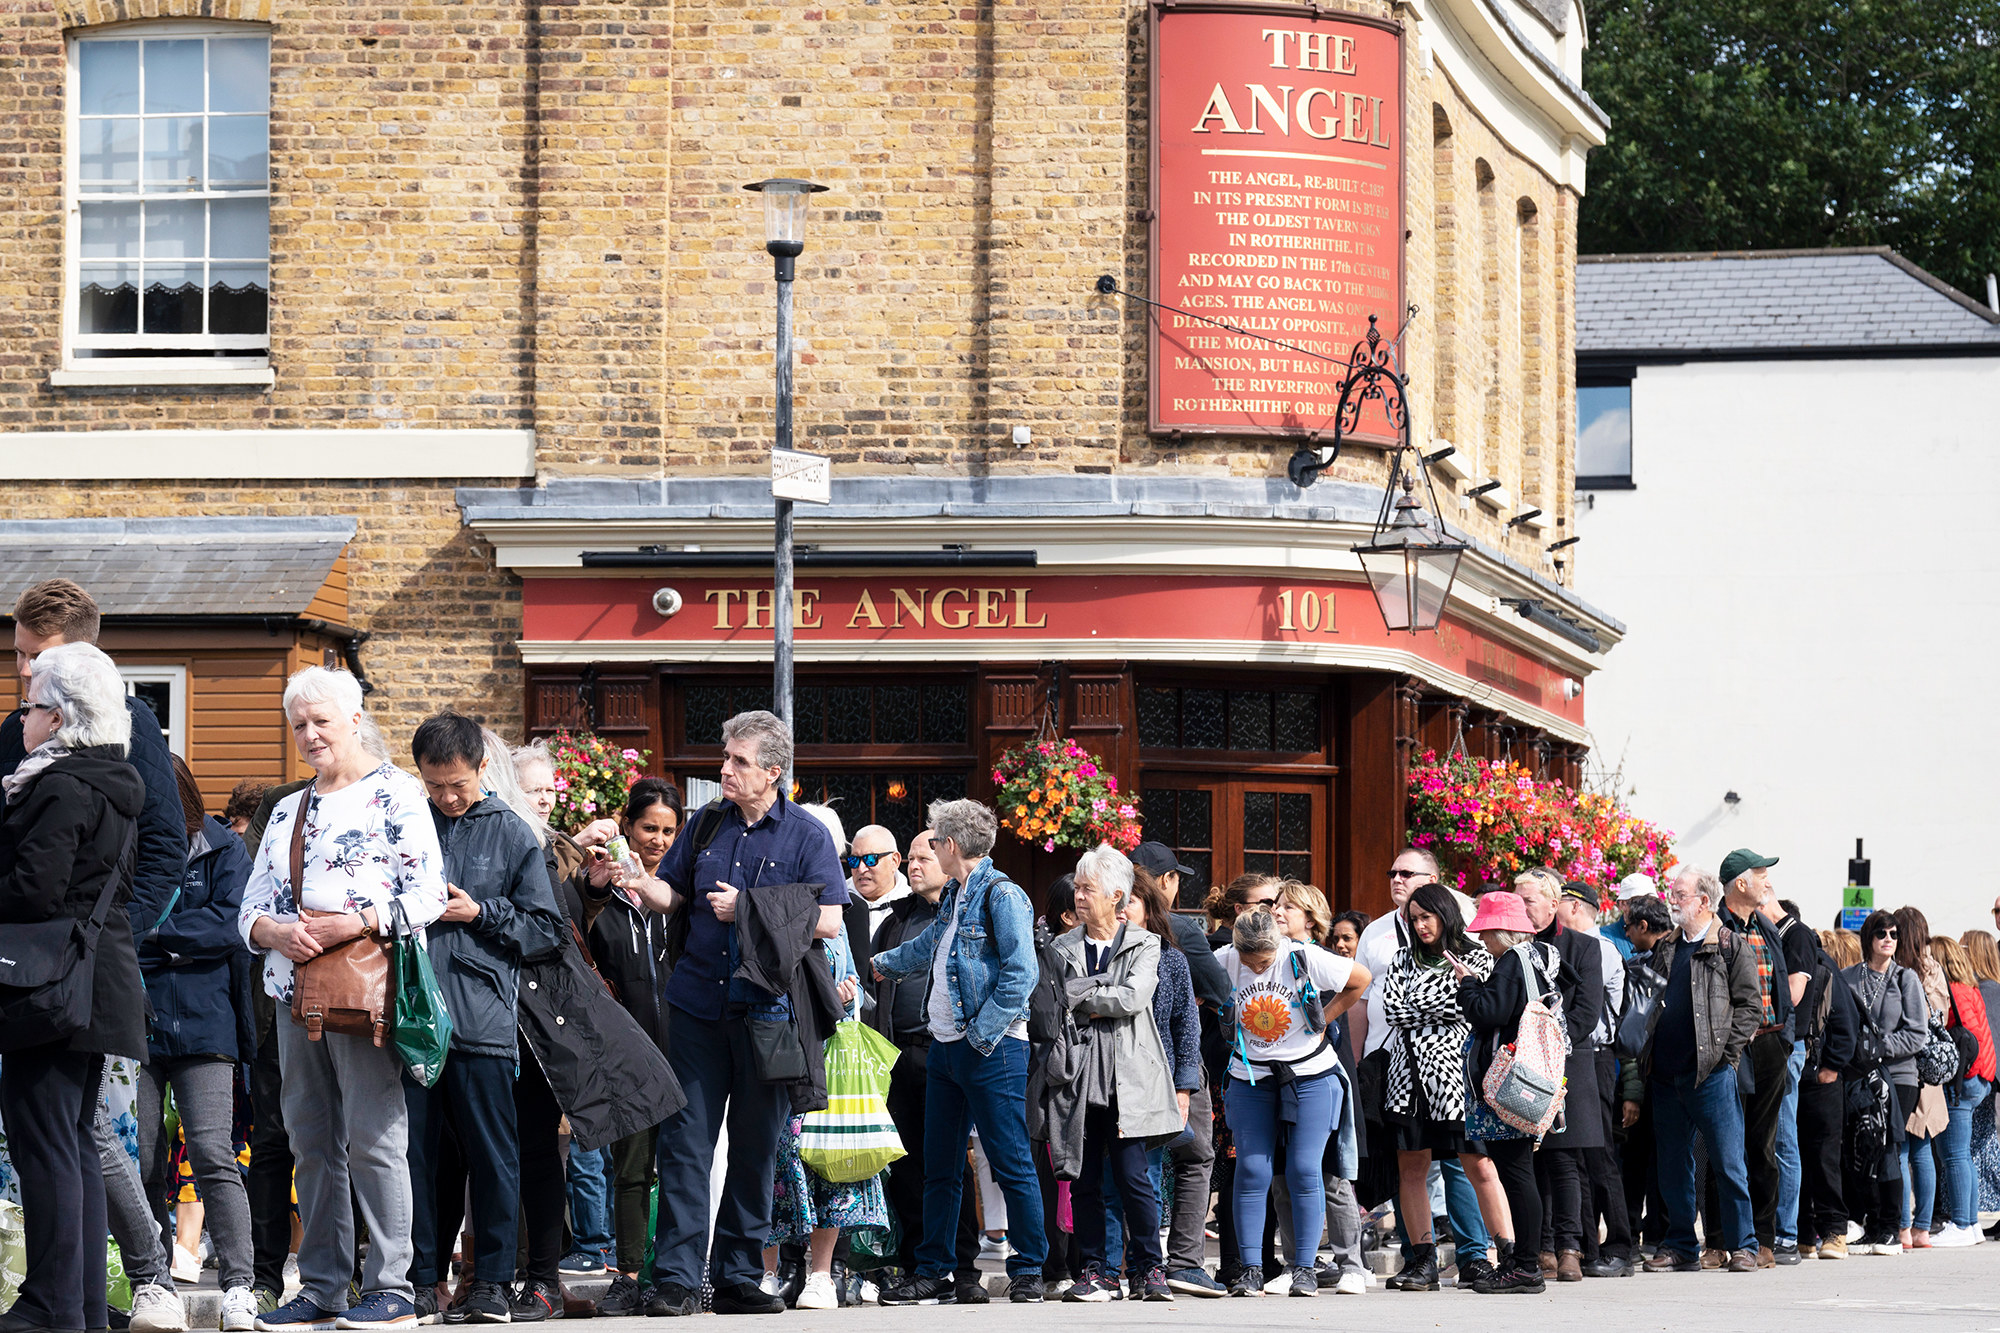 A line of people stand outside the Angel tavern